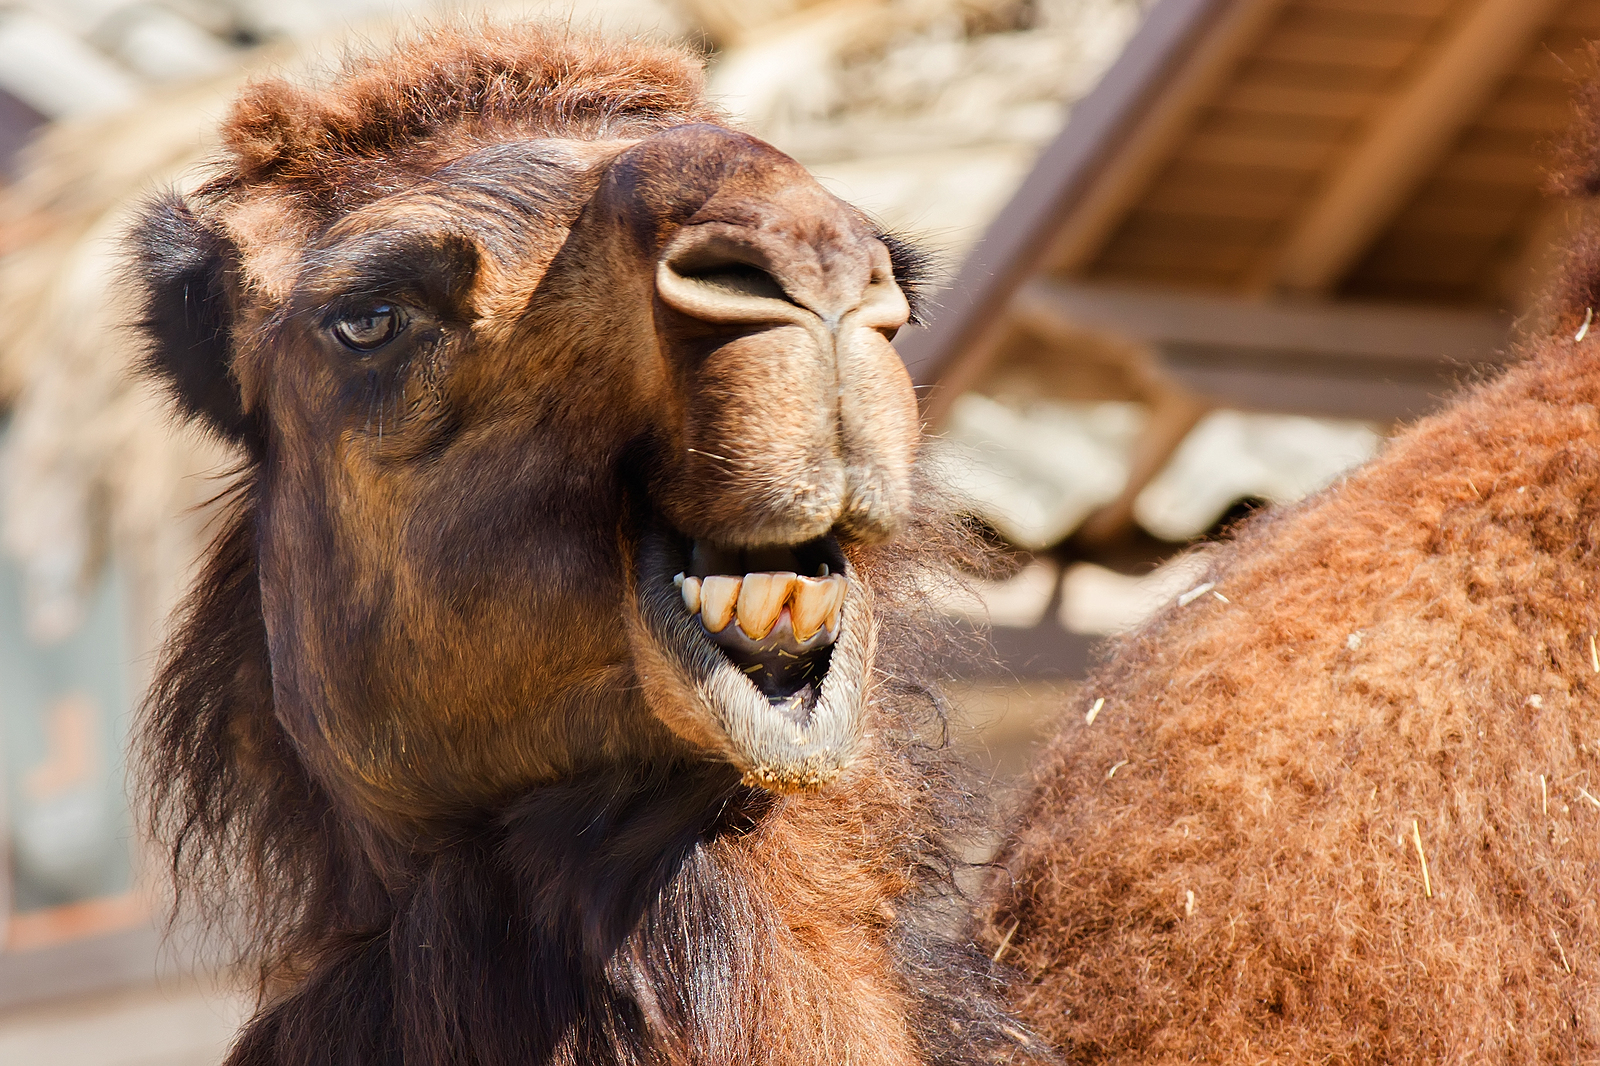 The Bizarre Mating Practices of the Arabian Camel